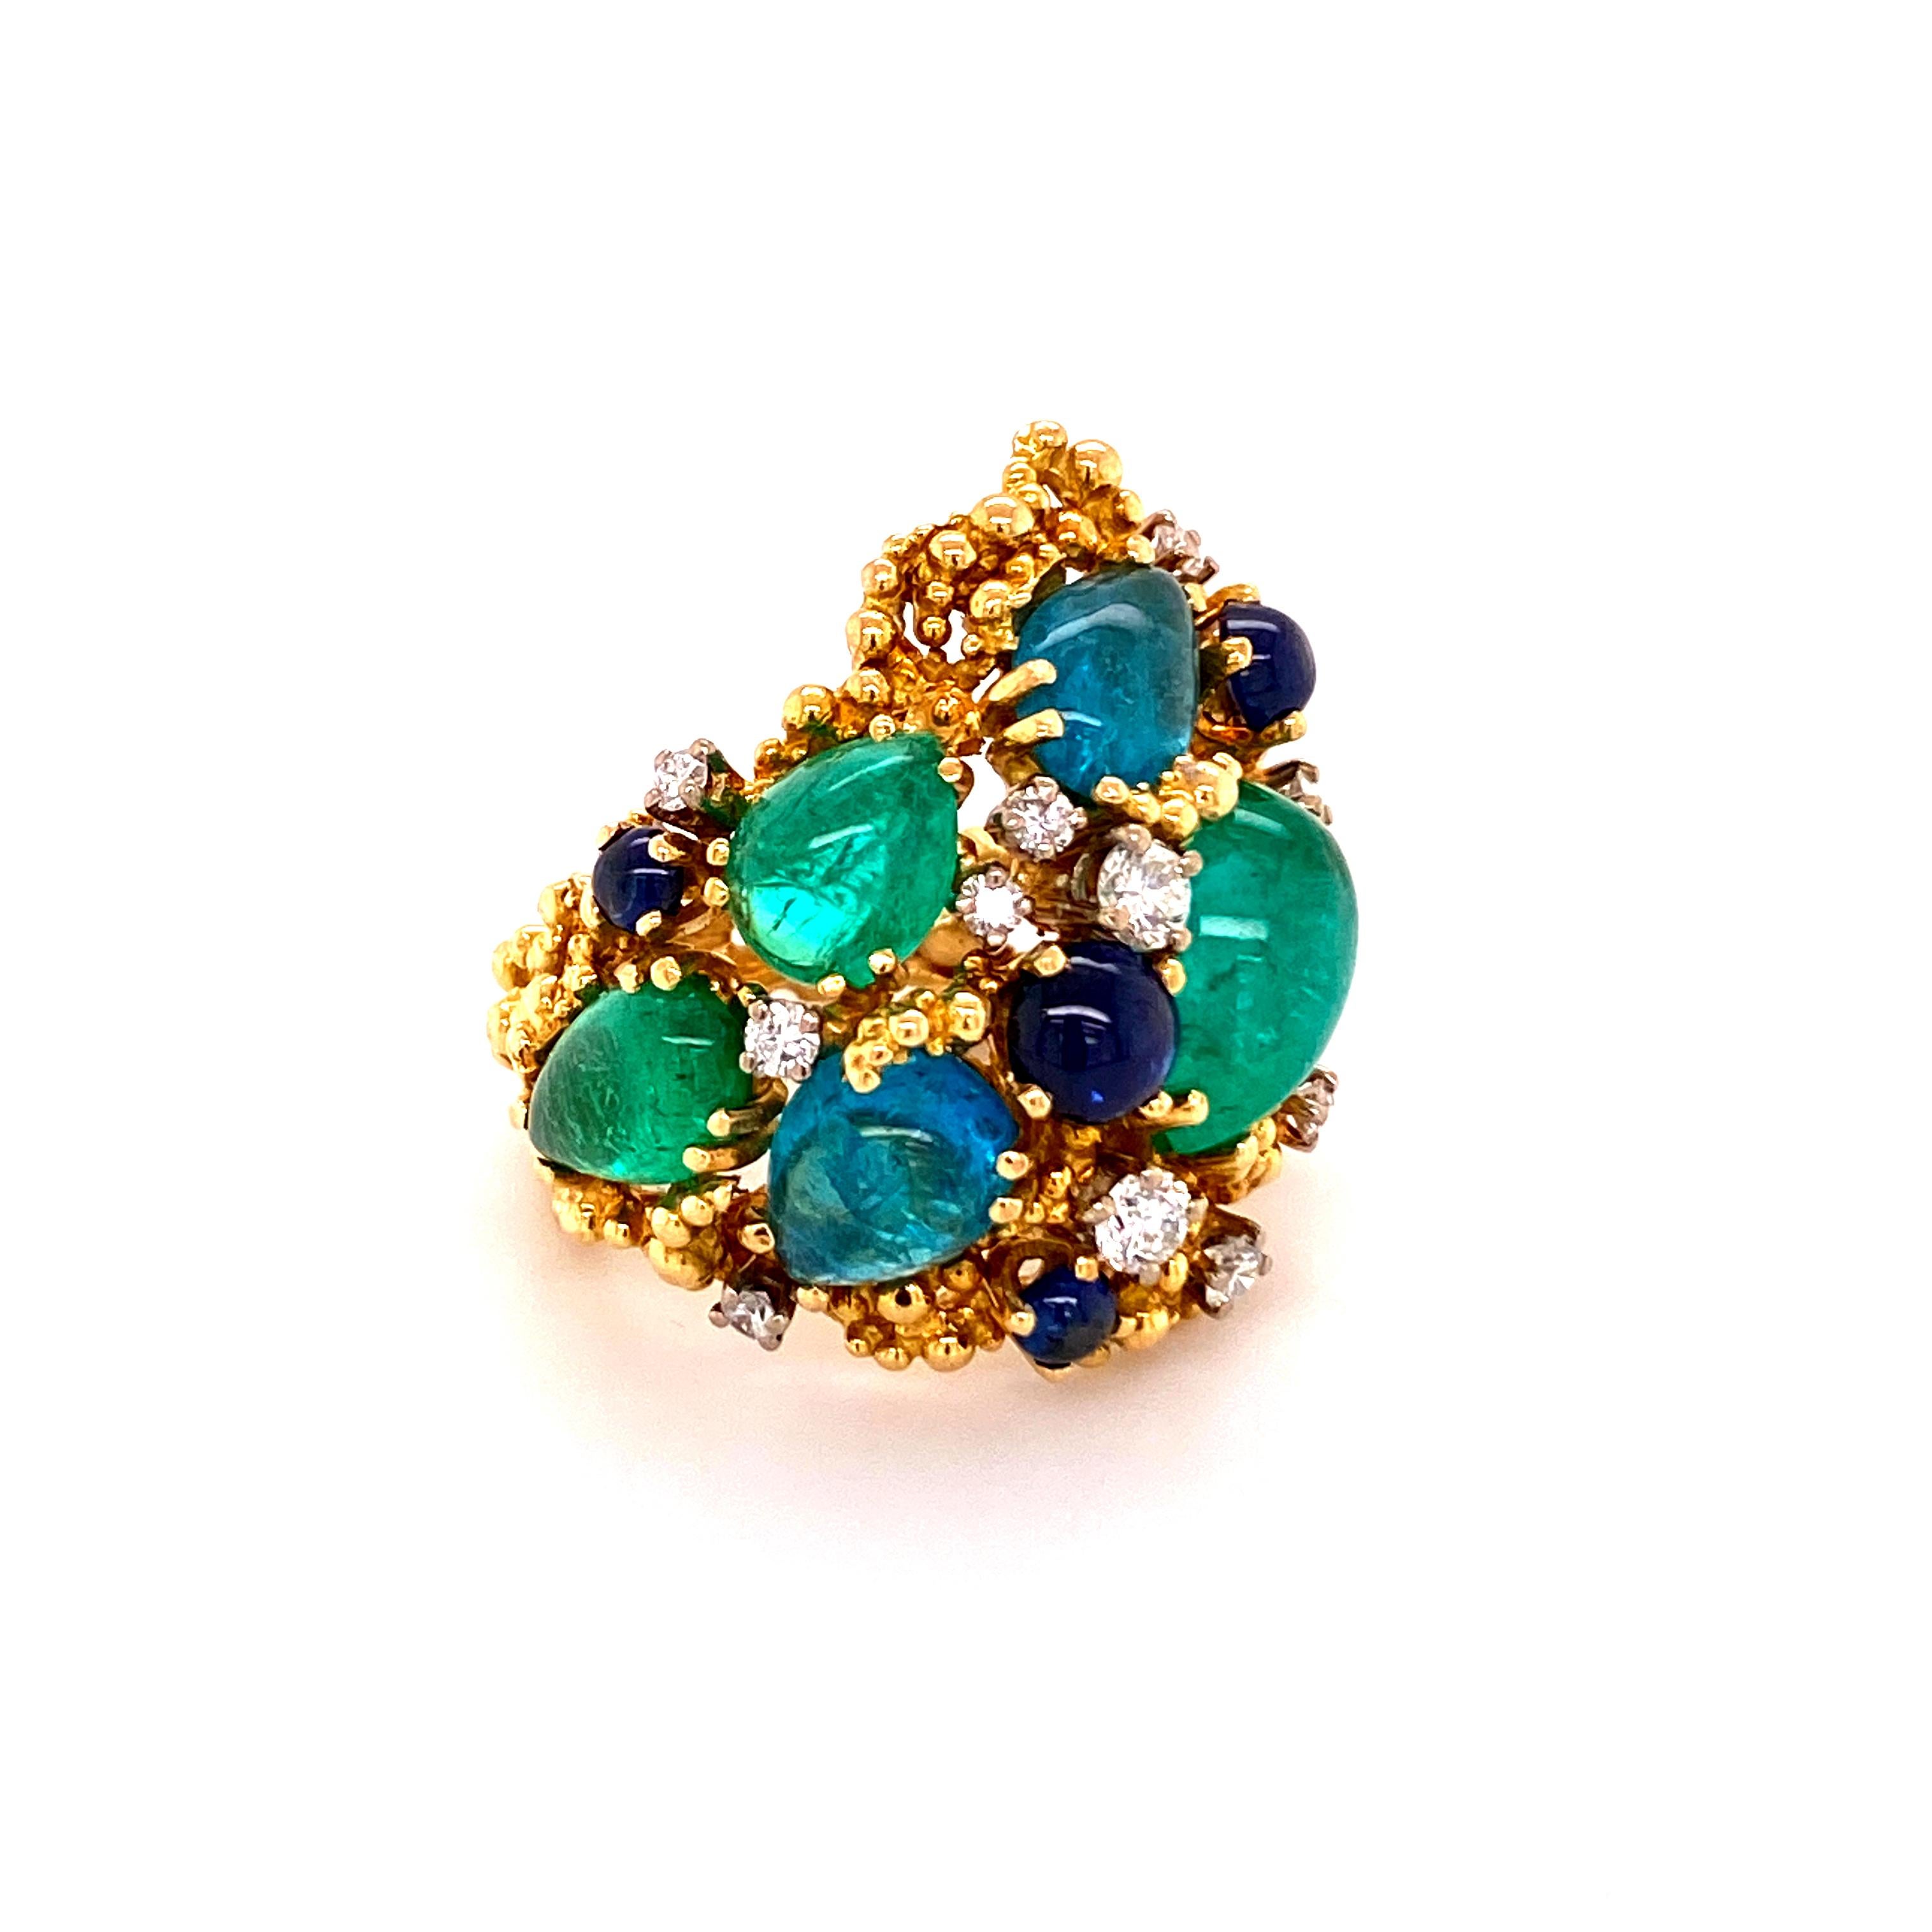 This superb piece of art by Gilbert Albert features five pear shaped paraiba tourmalines of electric neon blue and blue-green color, total weight approximately 7.80 carats. The stones are carefully arranged and set in 18 karat yellow gold. Accented